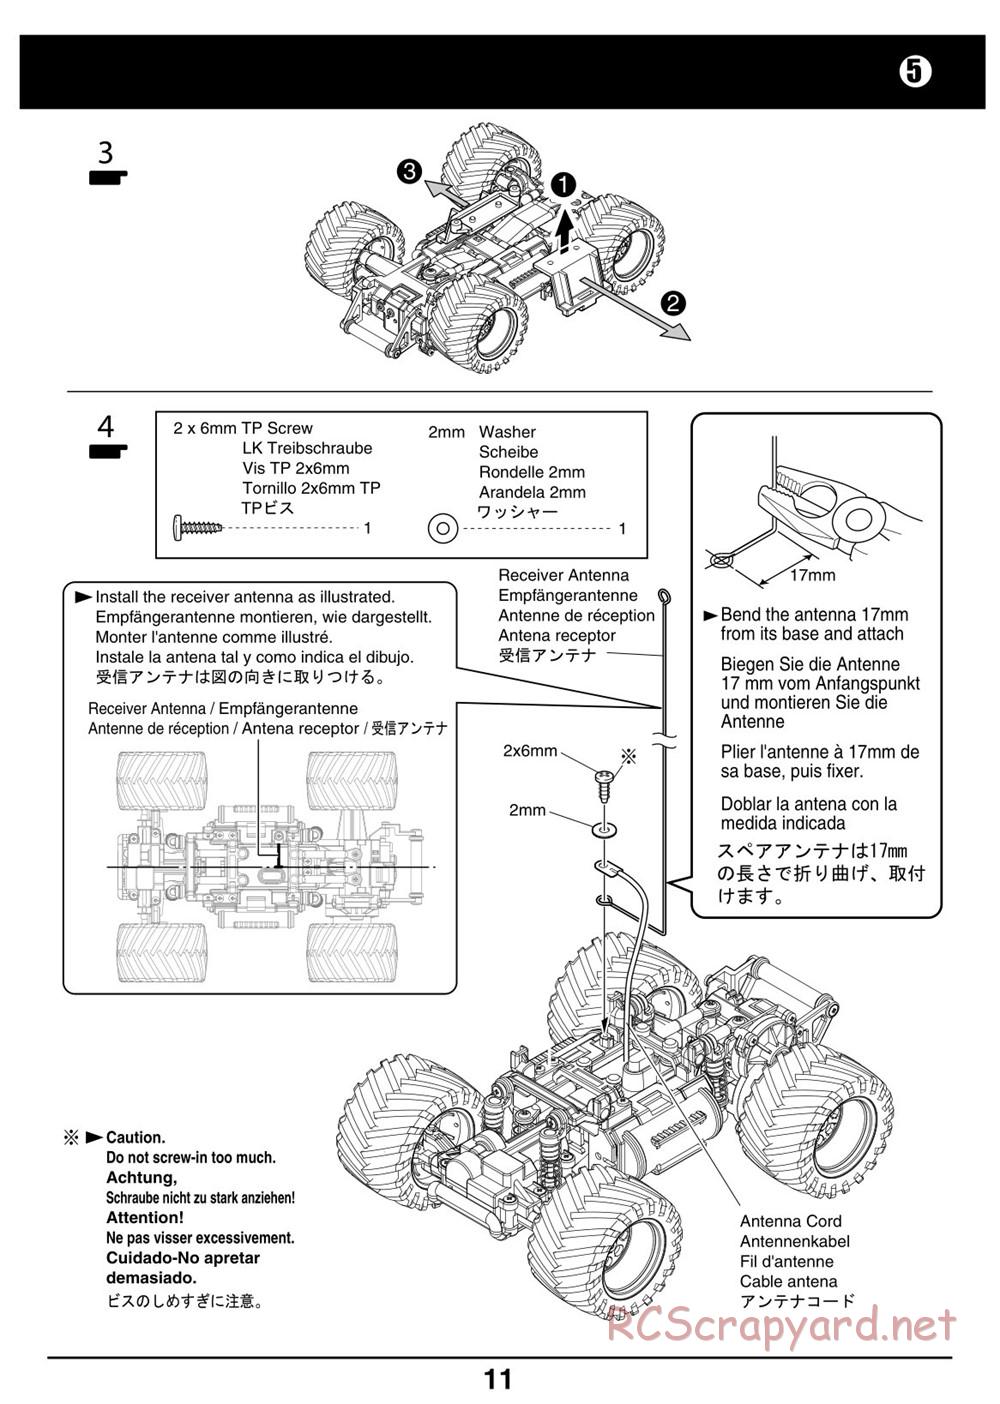 Kyosho - Mini-Z Monster Truck - Manual - Page 11